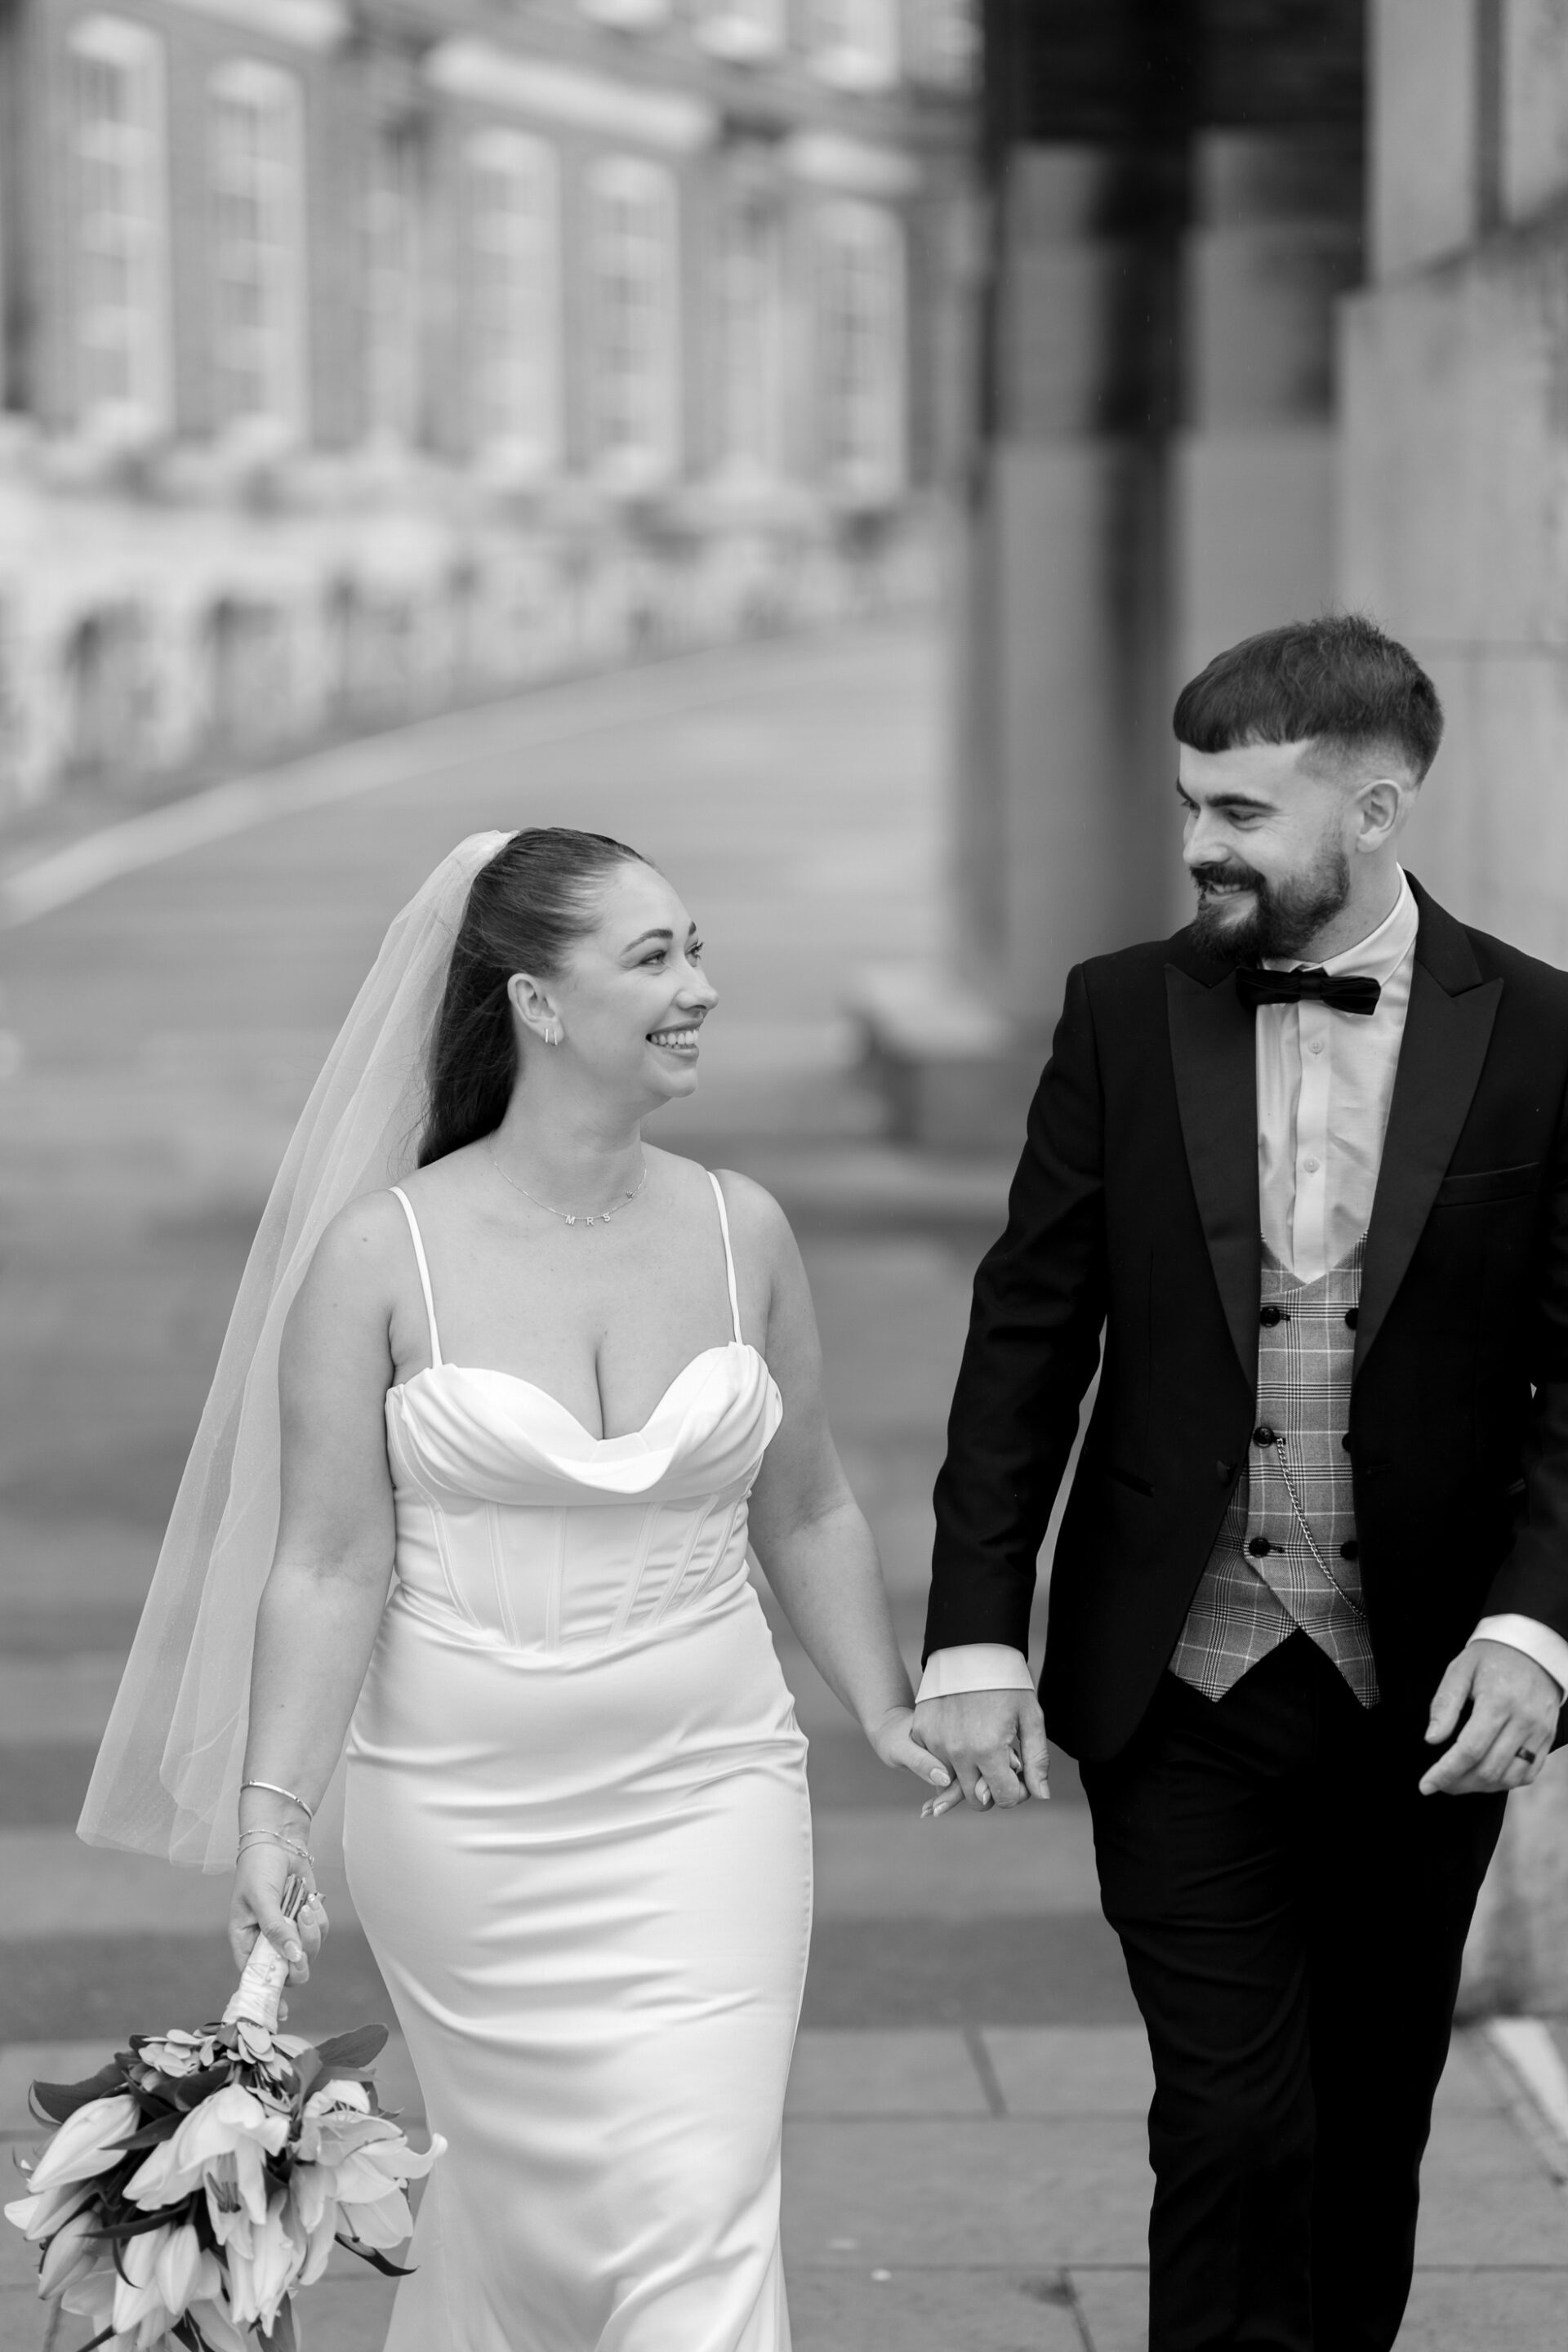 The bride and groom walk hand in hand for couple portraits in Bristol